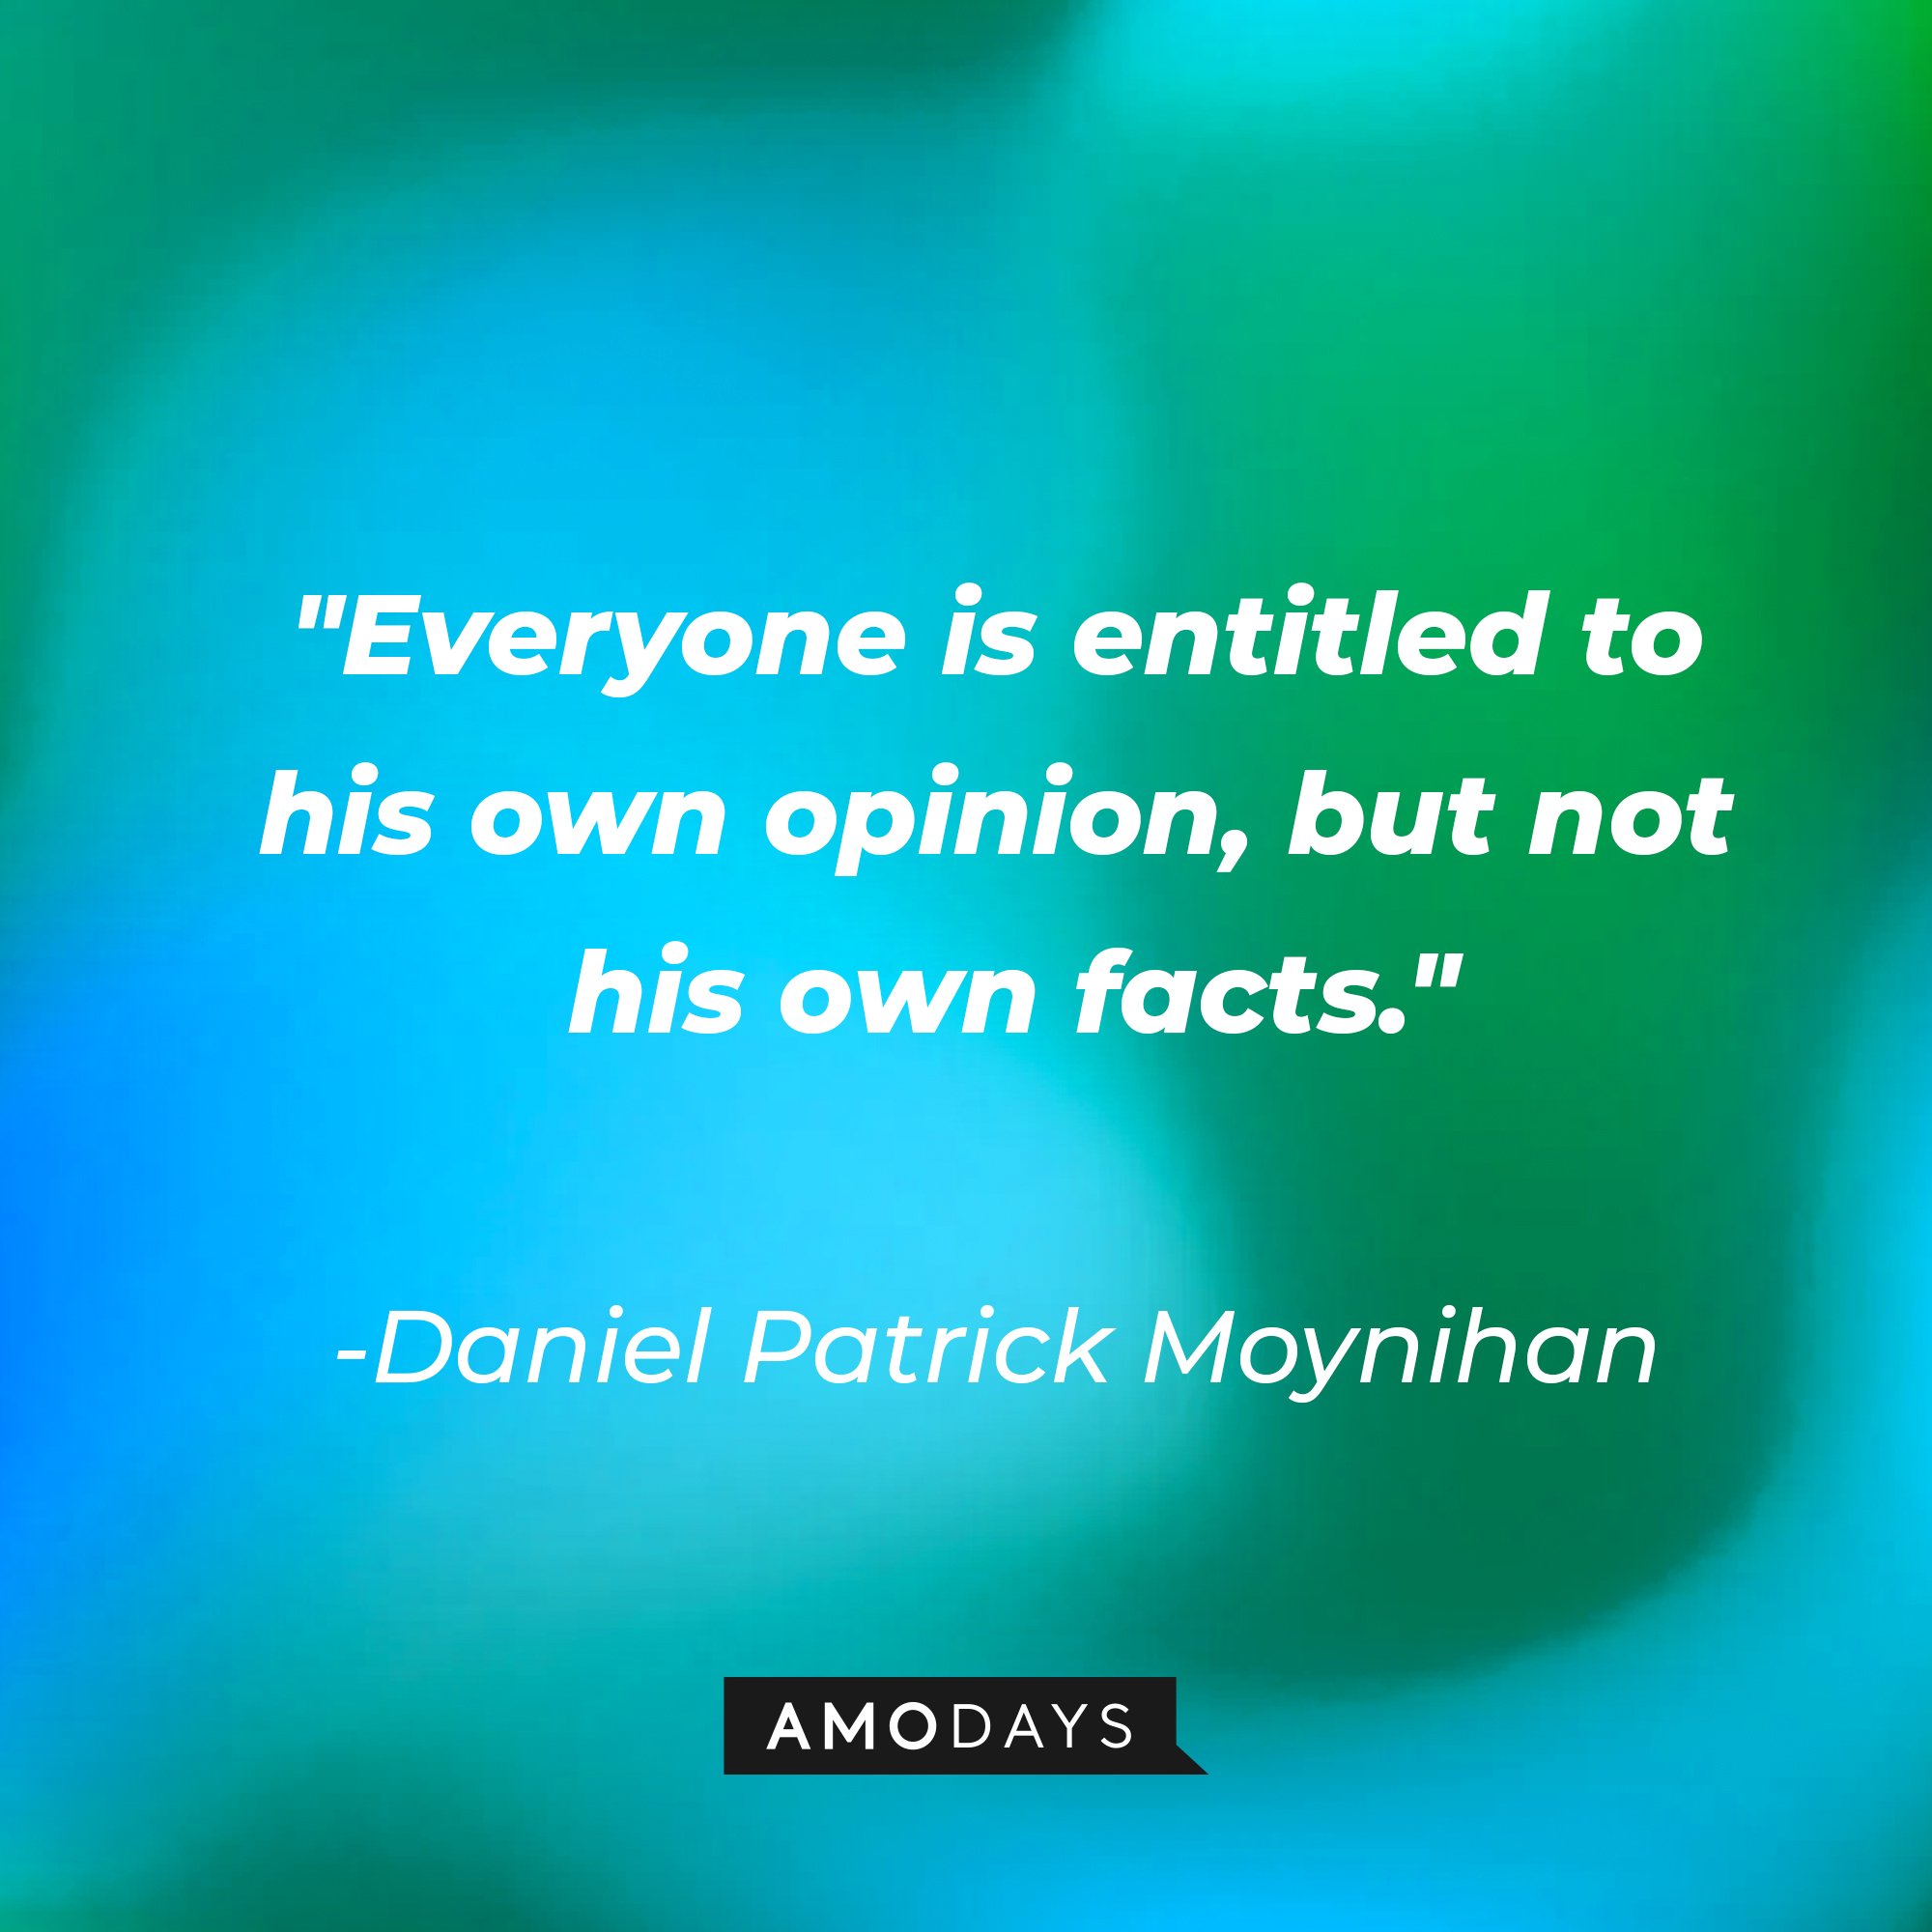 Daniel Patrick Moynihan’s quote: "Everyone is entitled to his own opinion, but not his own facts." | Image: AmoDays